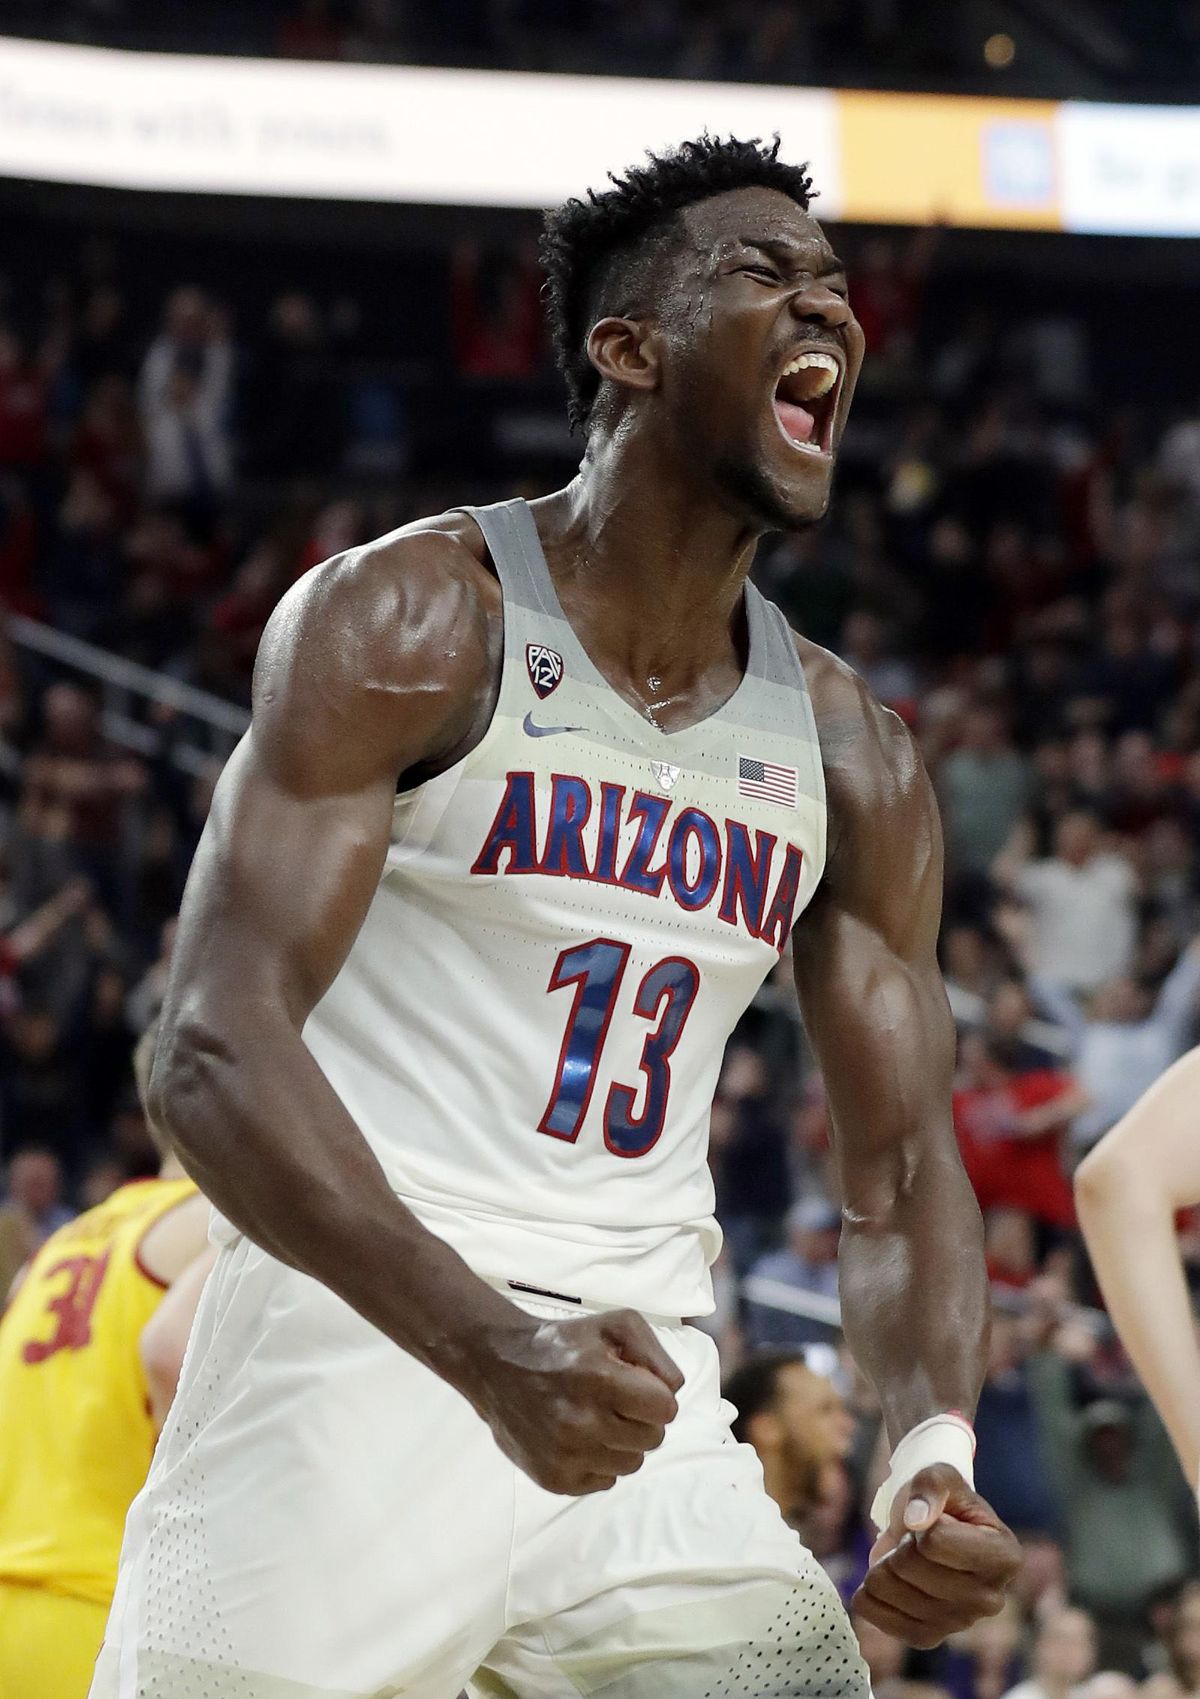 In this March 10, 2018, file photo, Arizona’s Deandre Ayton reacts after a dunk against Southern California during the second half of an NCAA college basketball game for the Pac-12 men’s tournament championship, in Las Vegas. Ayton was a force in his lone college season and looks like the favorite to land with Phoenix as the No. 1 overall pick in Thursday’s NBA Draft. (Isaac Brekken / Associated Press)